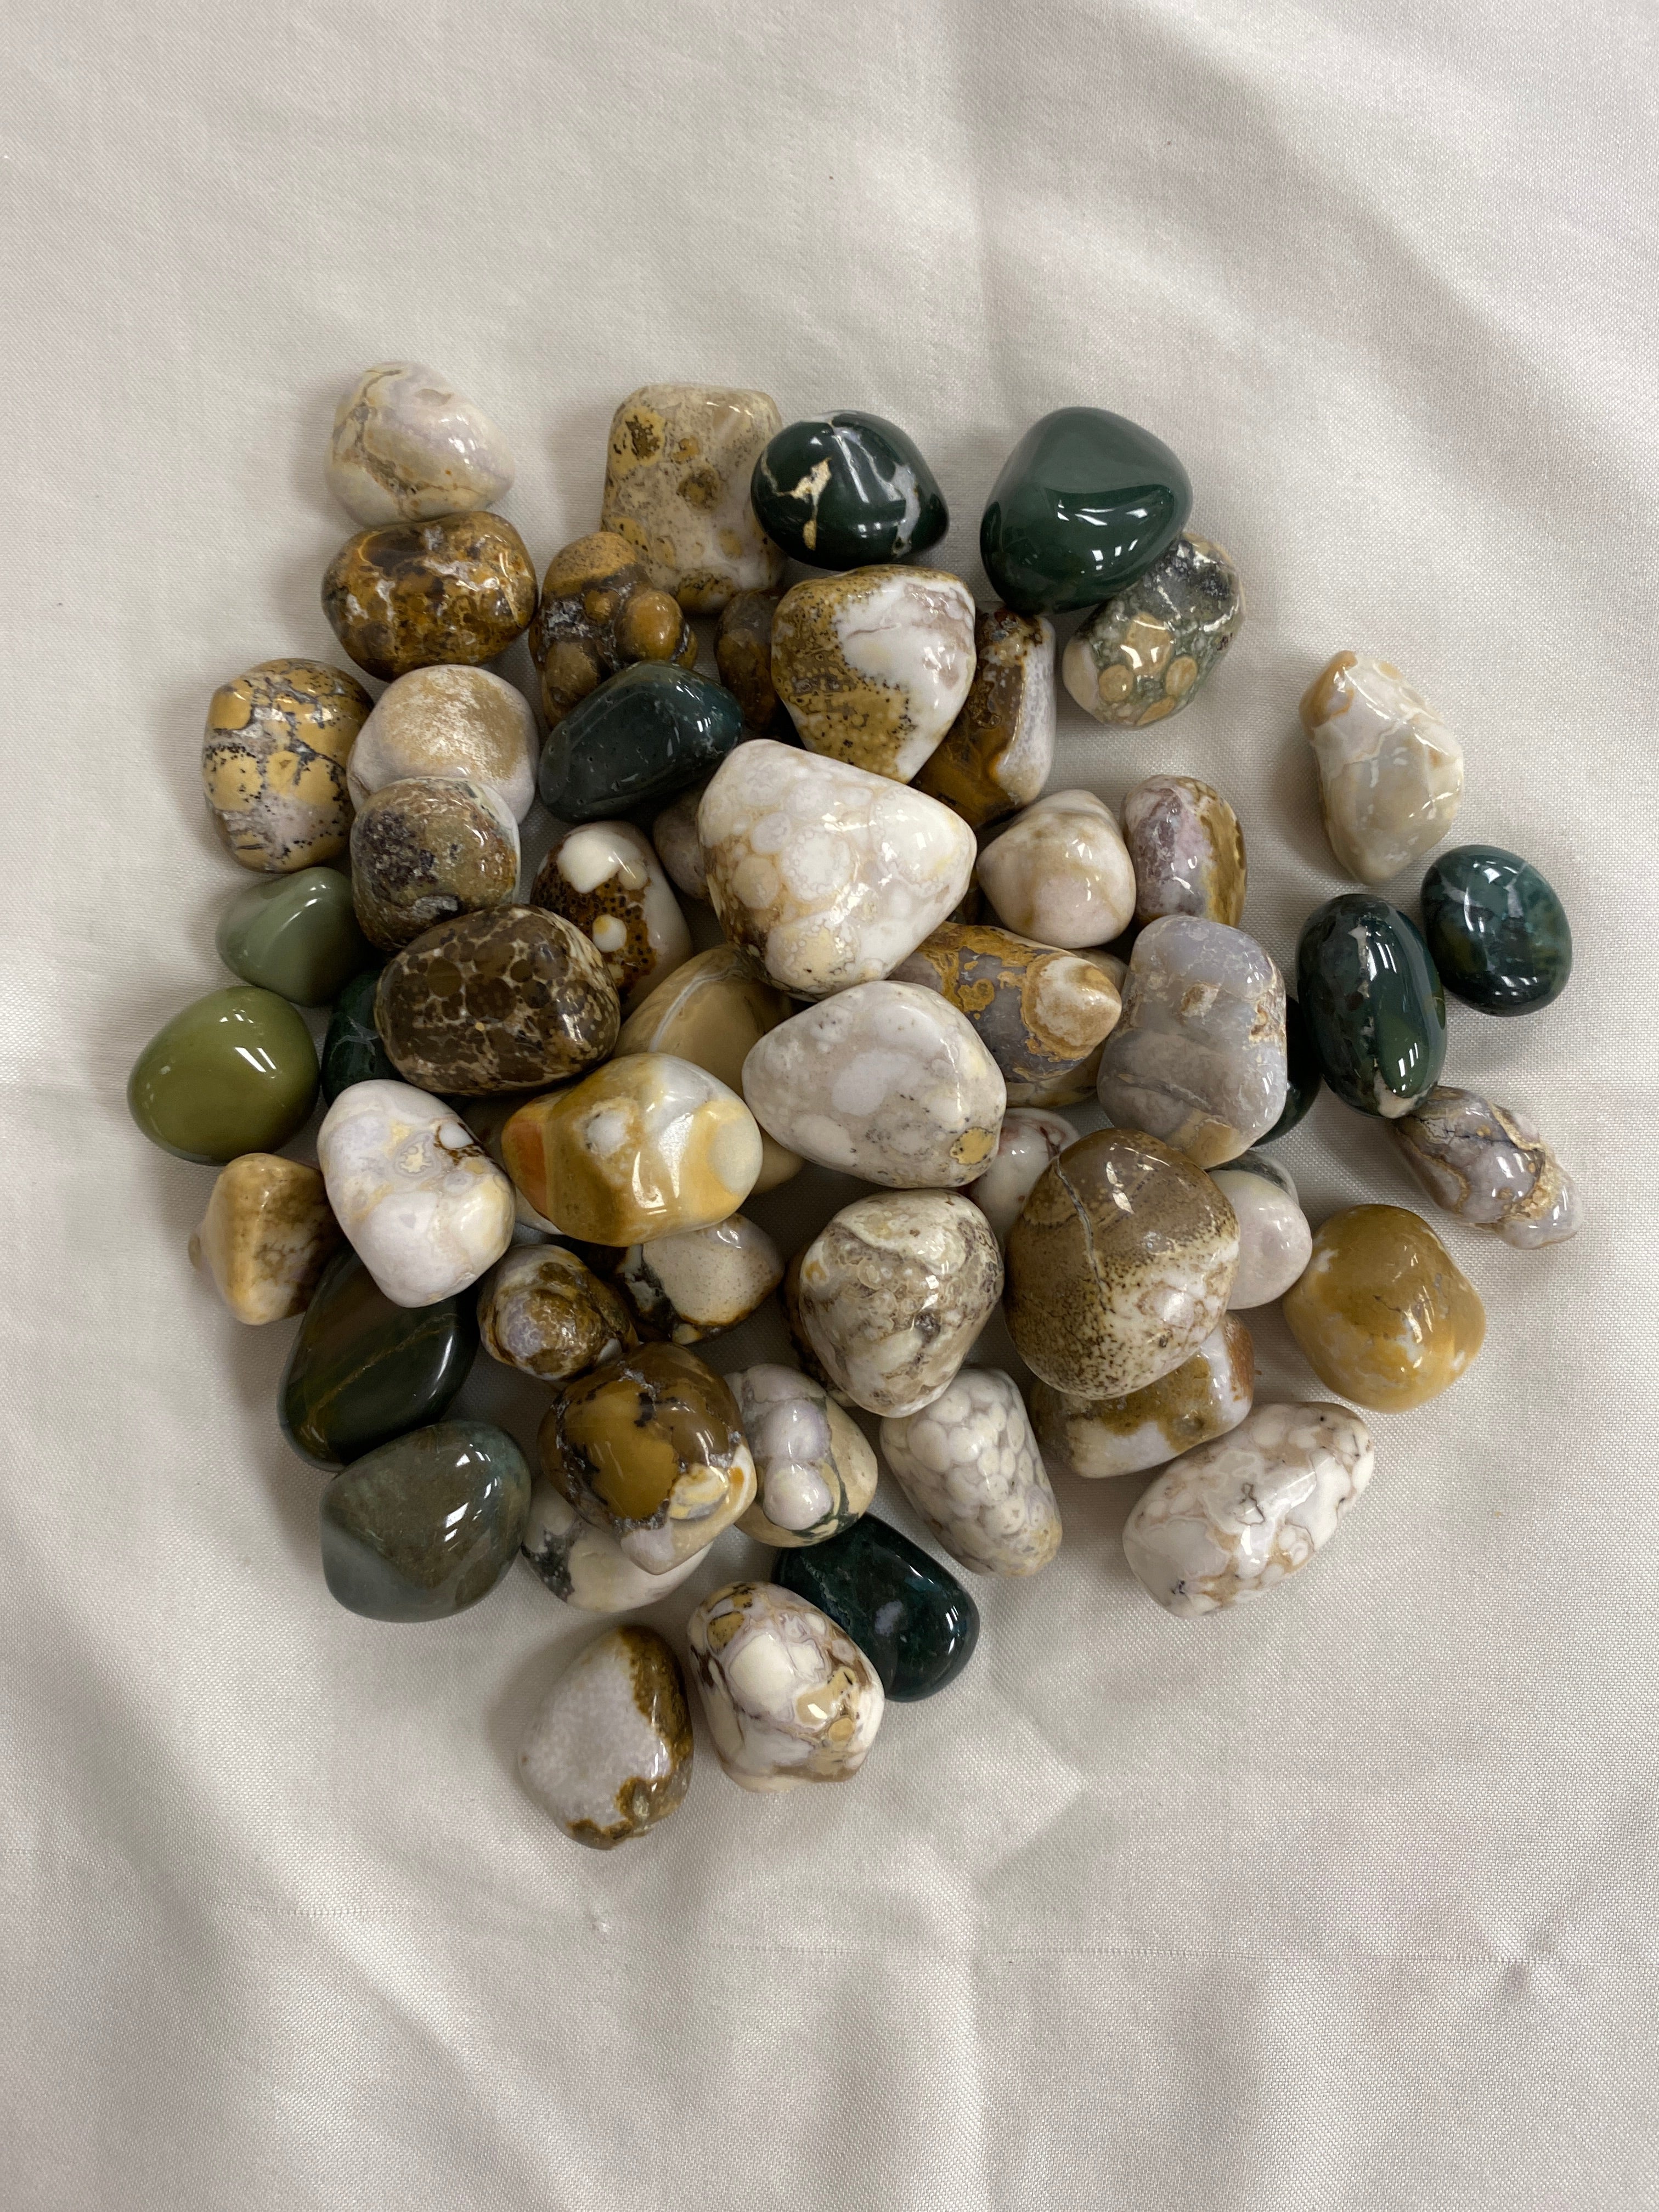 Several polished cobra jasper stone, a symbol of the guardian spirit, encouraging courage, self-discovery, and overcoming challenges.